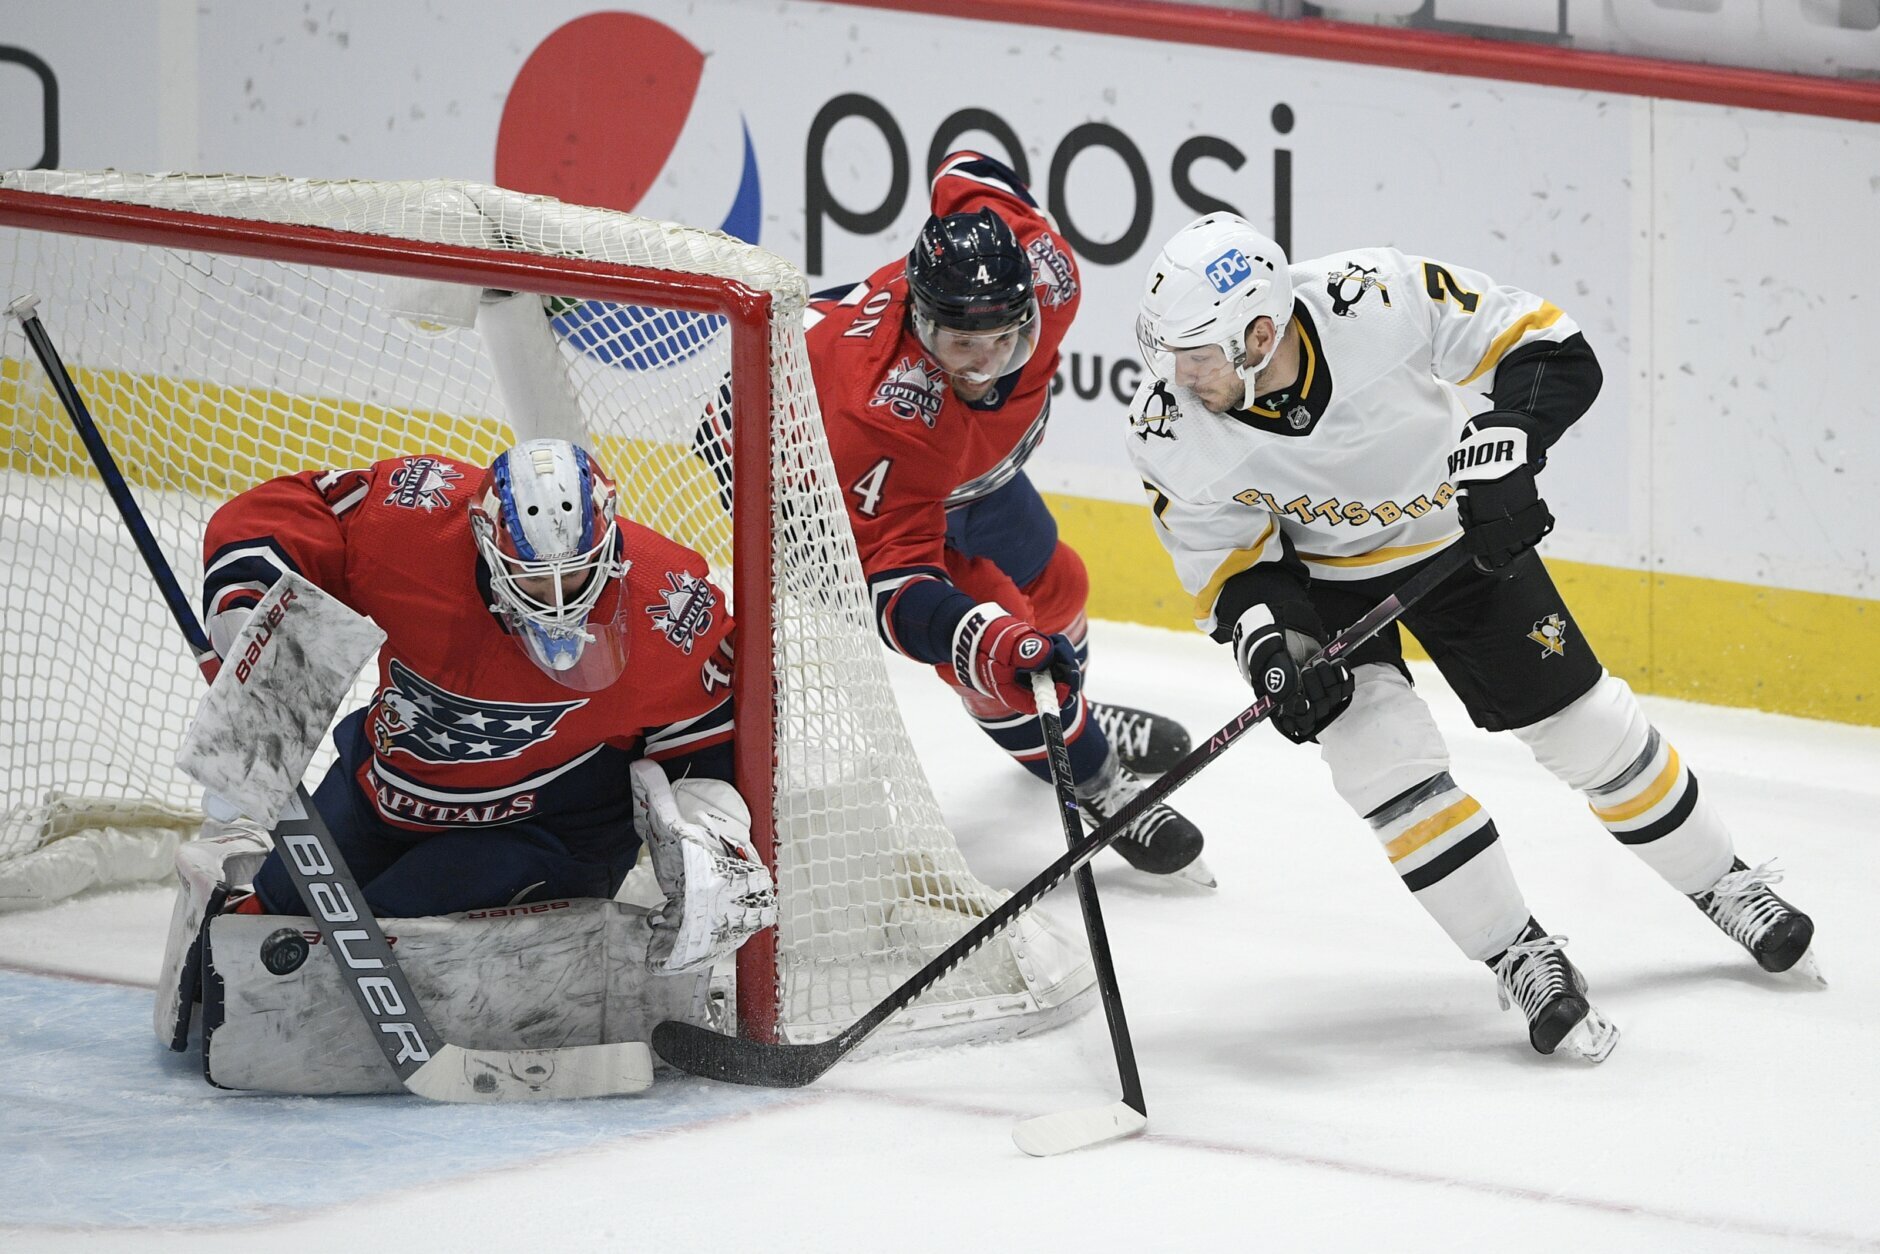 Washington Capitals goaltender Vitek Vanecek (41) stops the puck against Pittsburgh Penguins center Colton Sceviour (7) during the first period of an NHL hockey game, Tuesday, Feb. 23, 2021, in Washington. Also seen is Capitals defenseman Brenden Dillon (4). (AP Photo/Nick Wass)